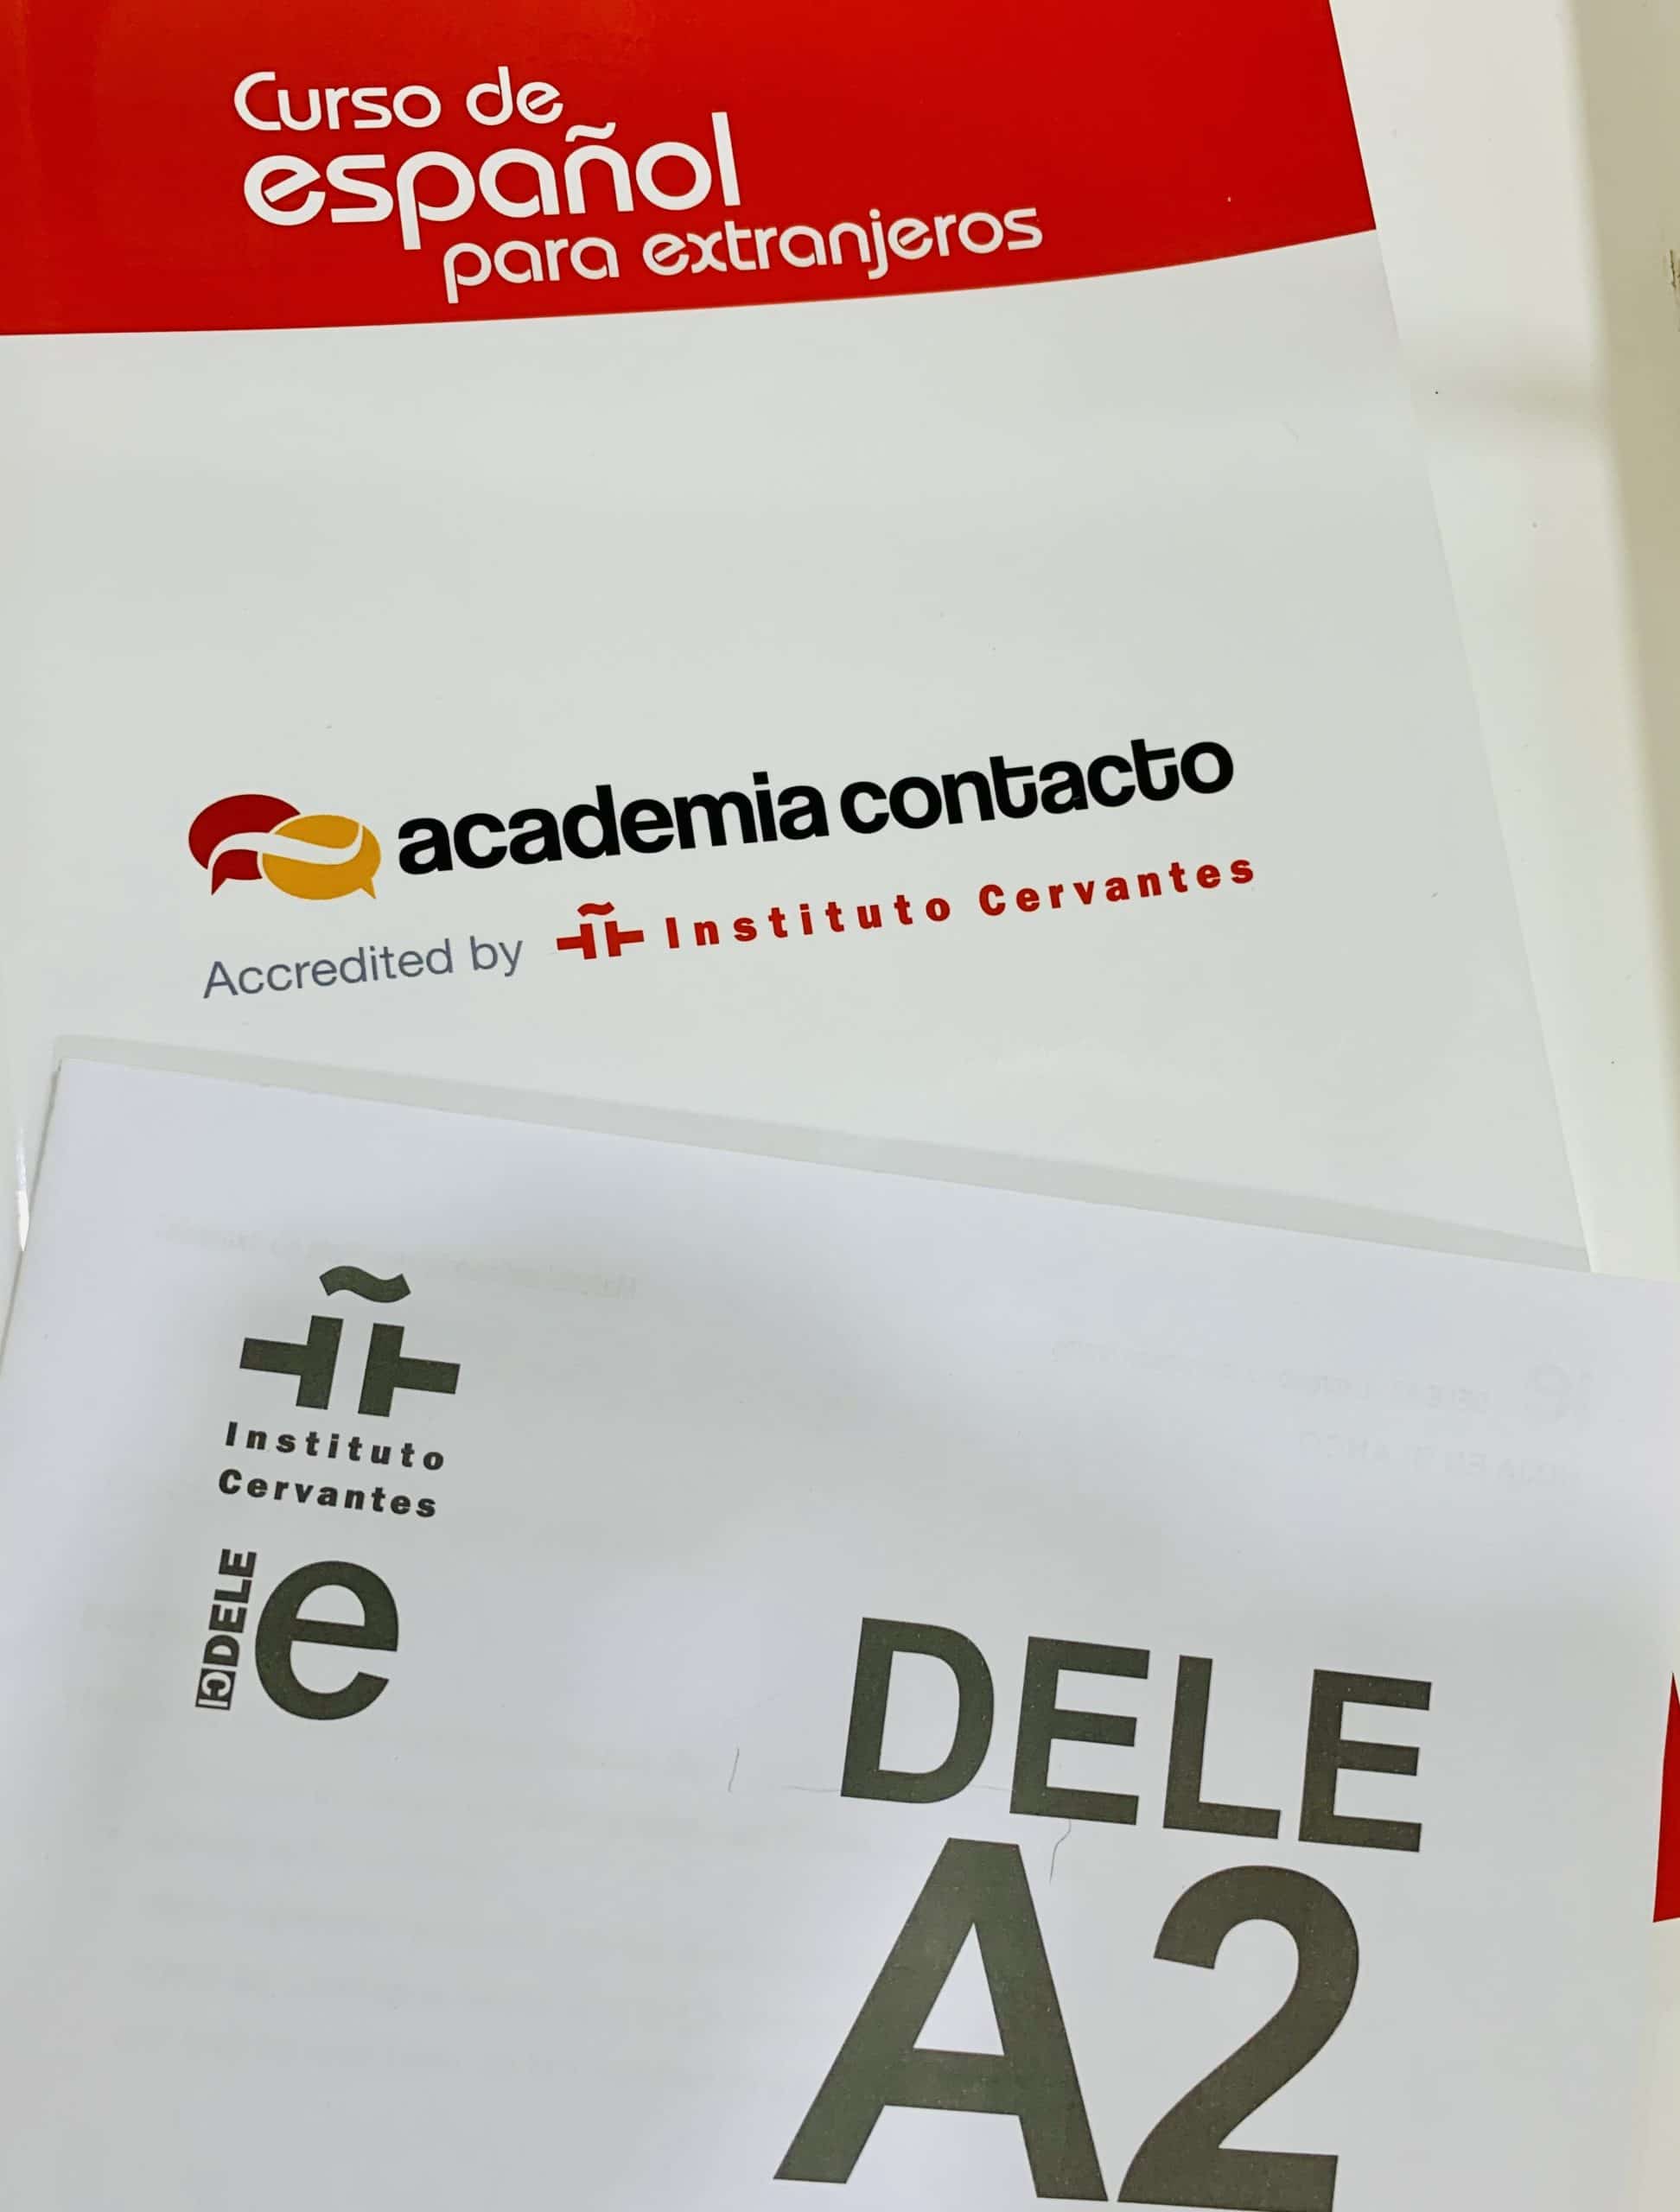 How to prepare for the A2 DELE exam? Academia Contacto